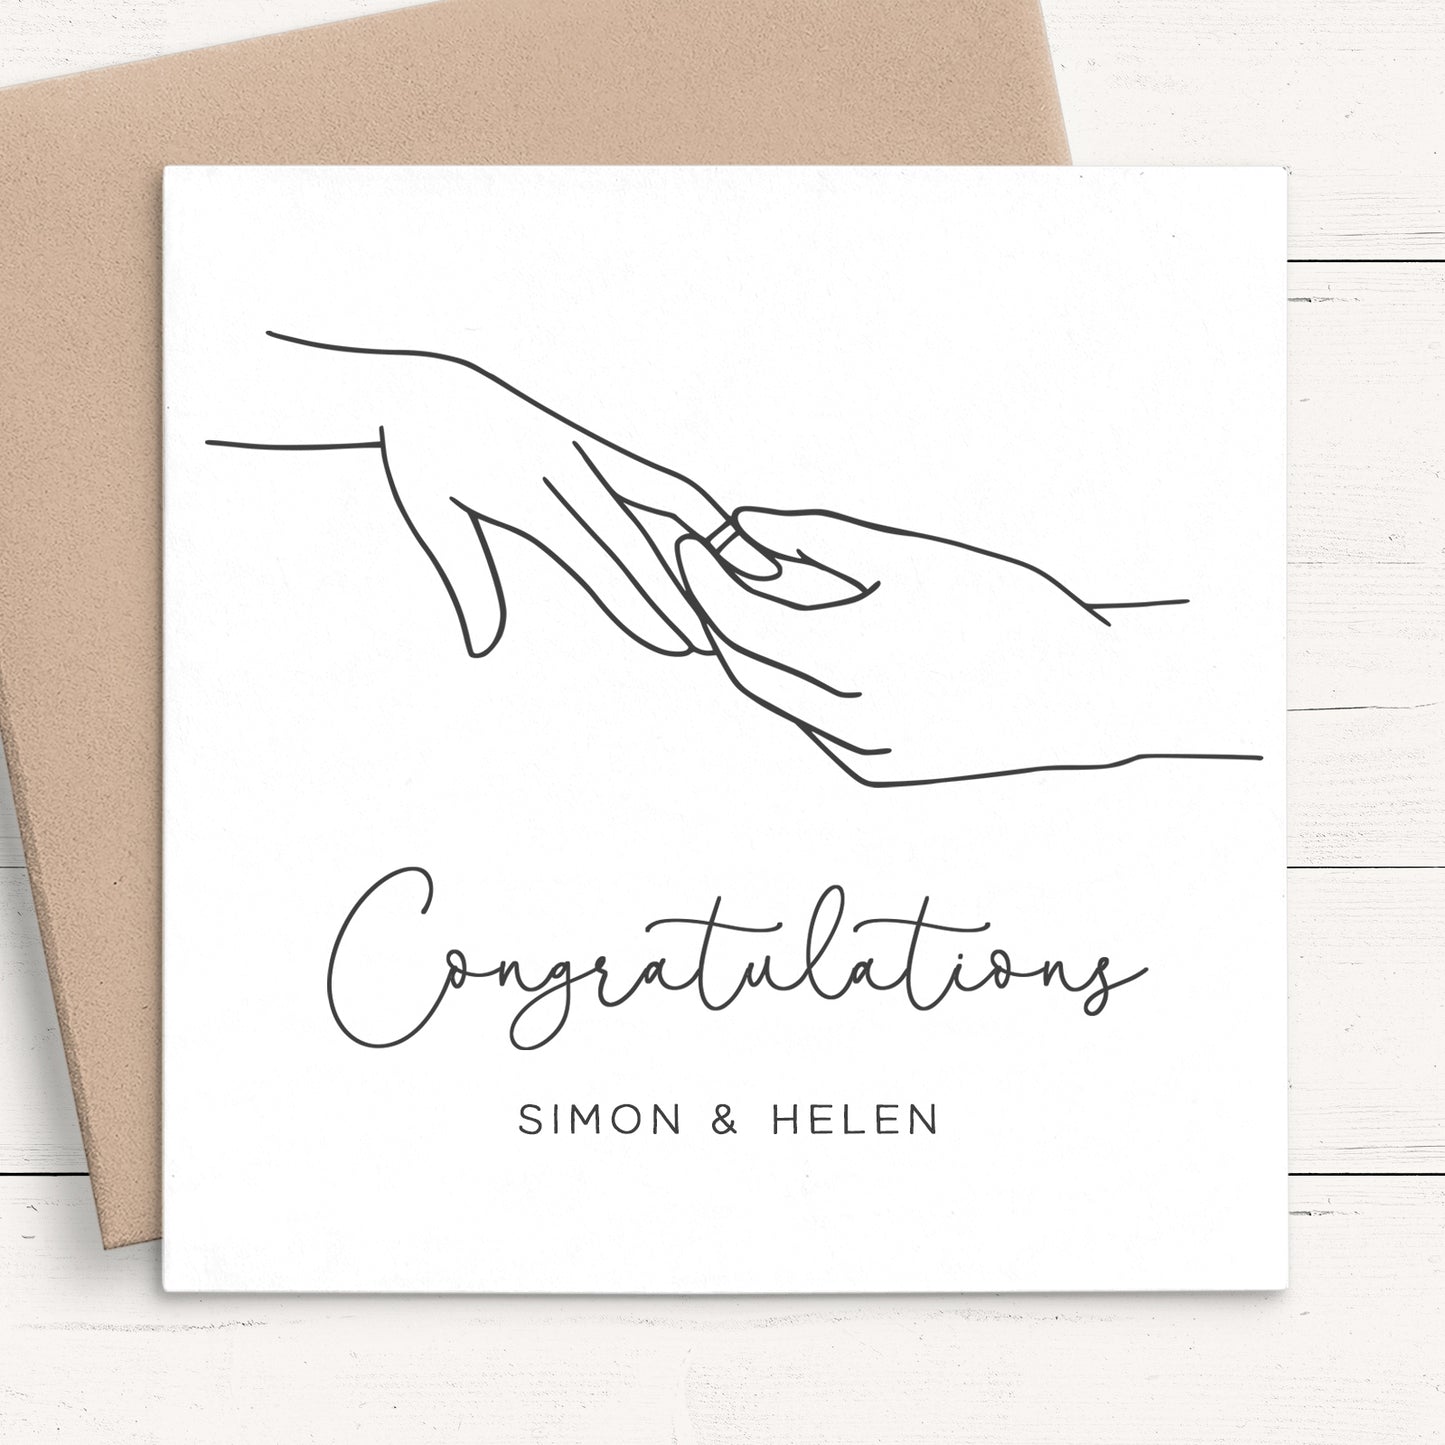 couple holding hands engagement line art card personalised matte white smooth cardstock kraft brown envelope